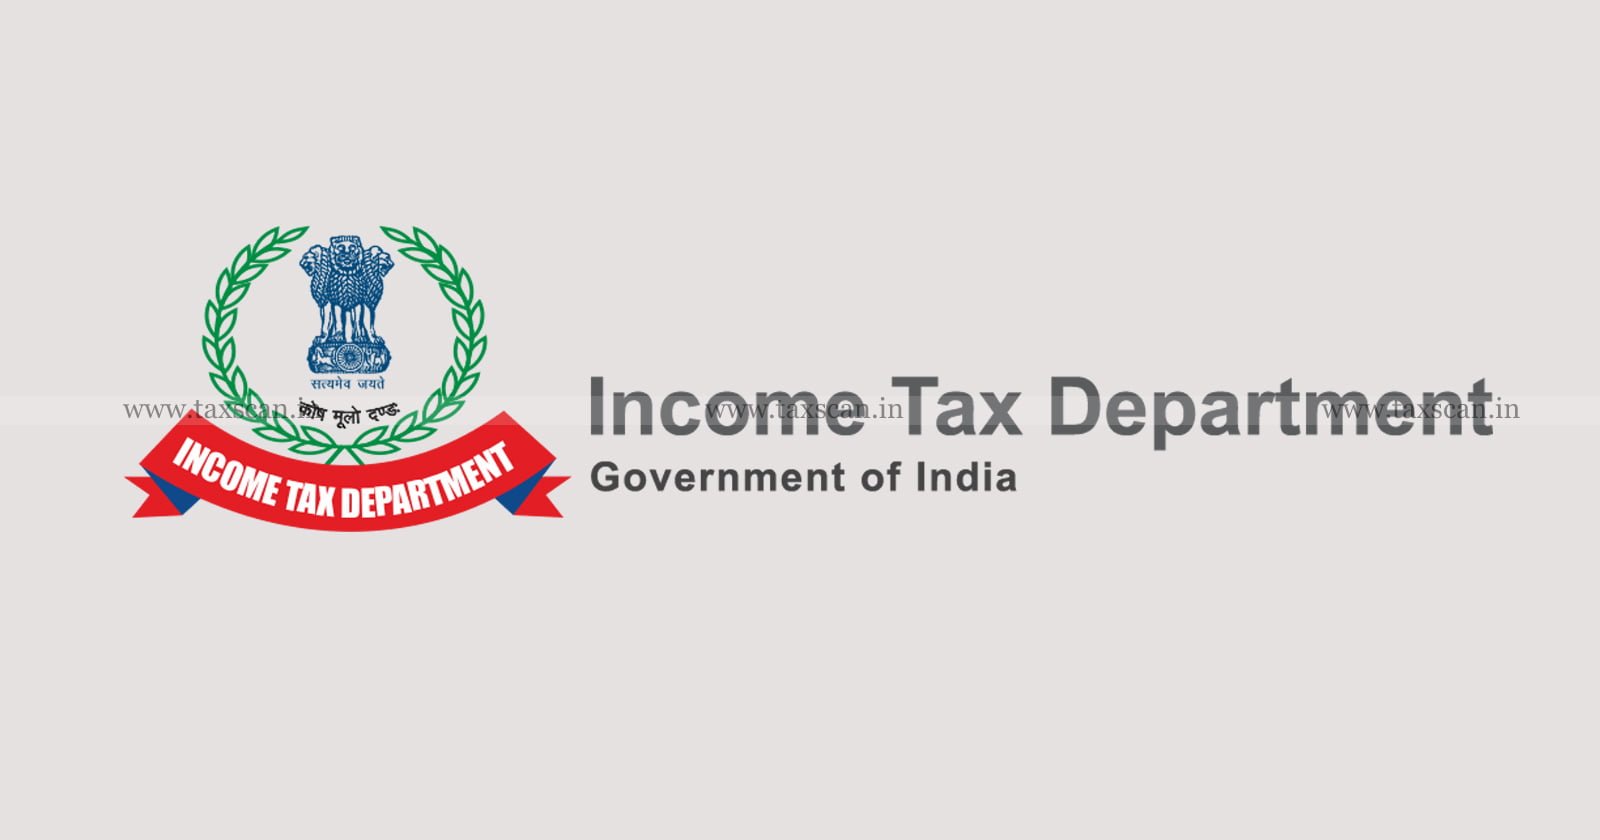 Assessment Completed - issue resolved and Affirmed by SC - Delhi HC dismisses Appeal of Income Tax Dept - TAXSCAN